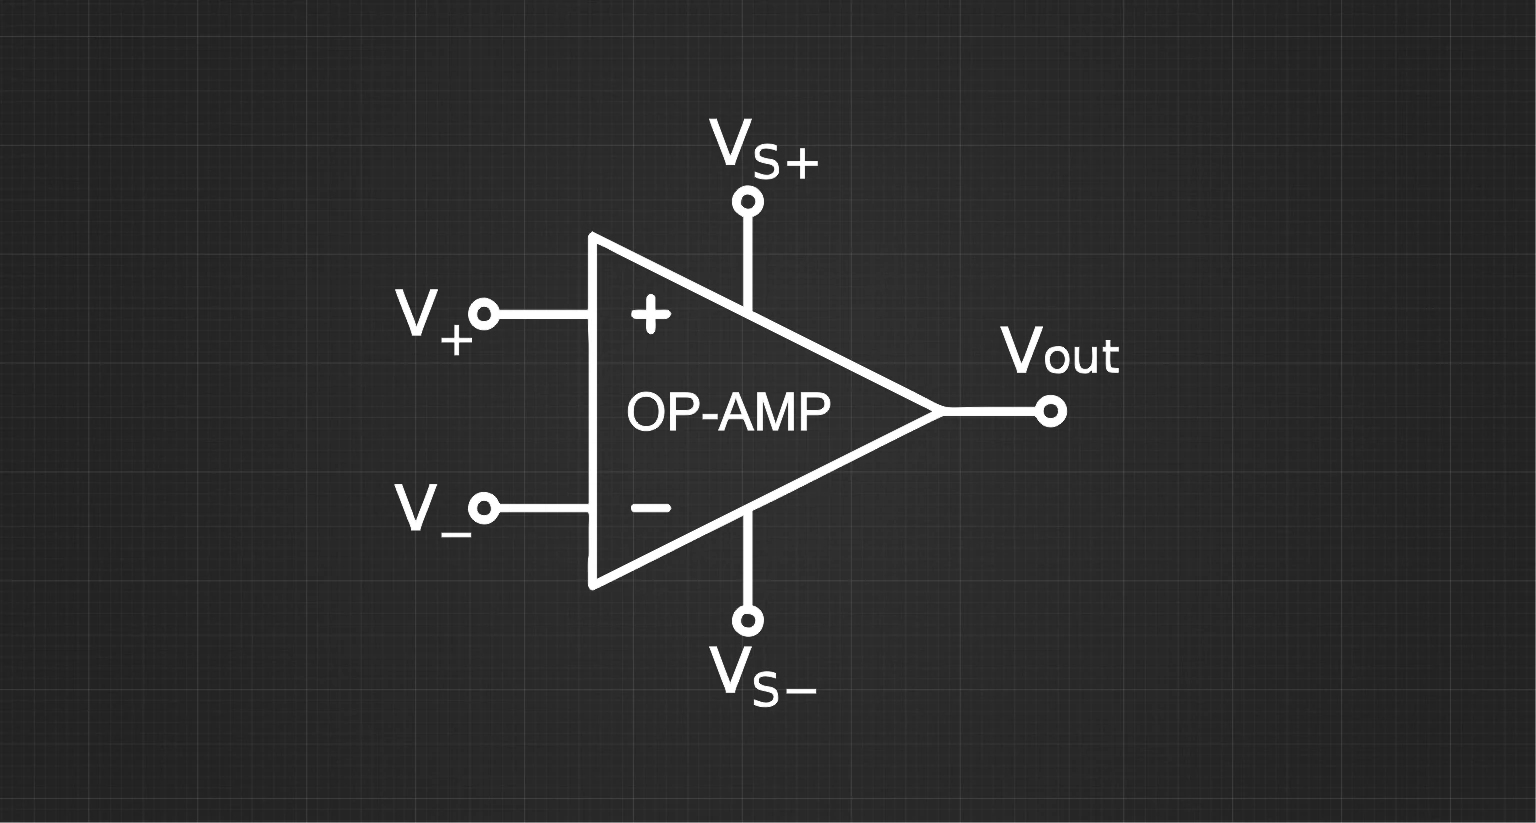 opamp symbol with black background used as featured image